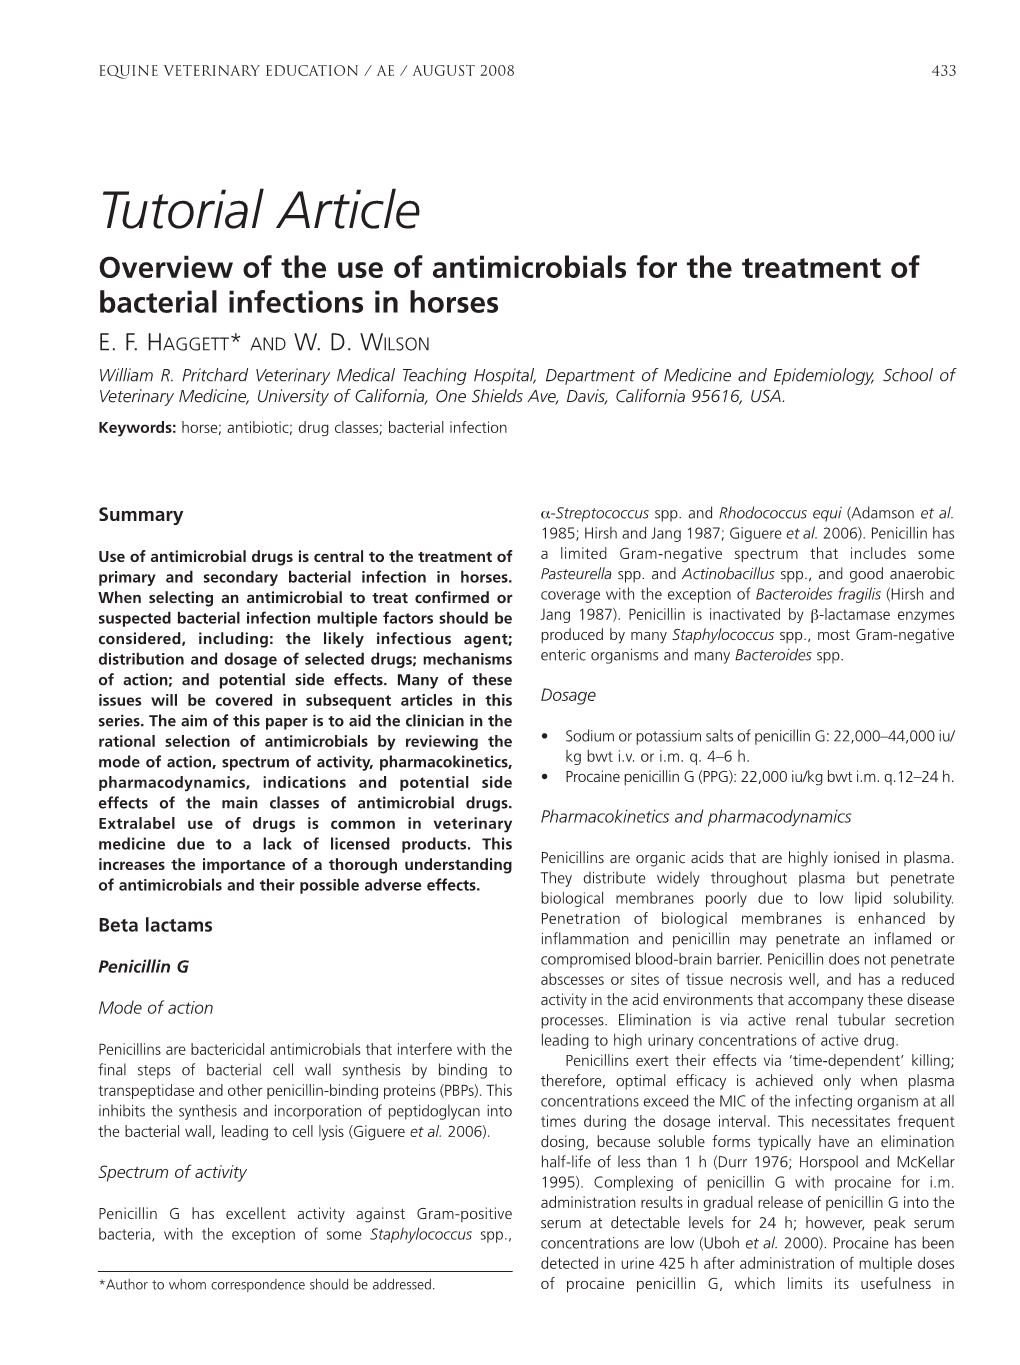 Tutorial Article Overview of the Use of Antimicrobials for the Treatment of Bacterial Infections in Horses E